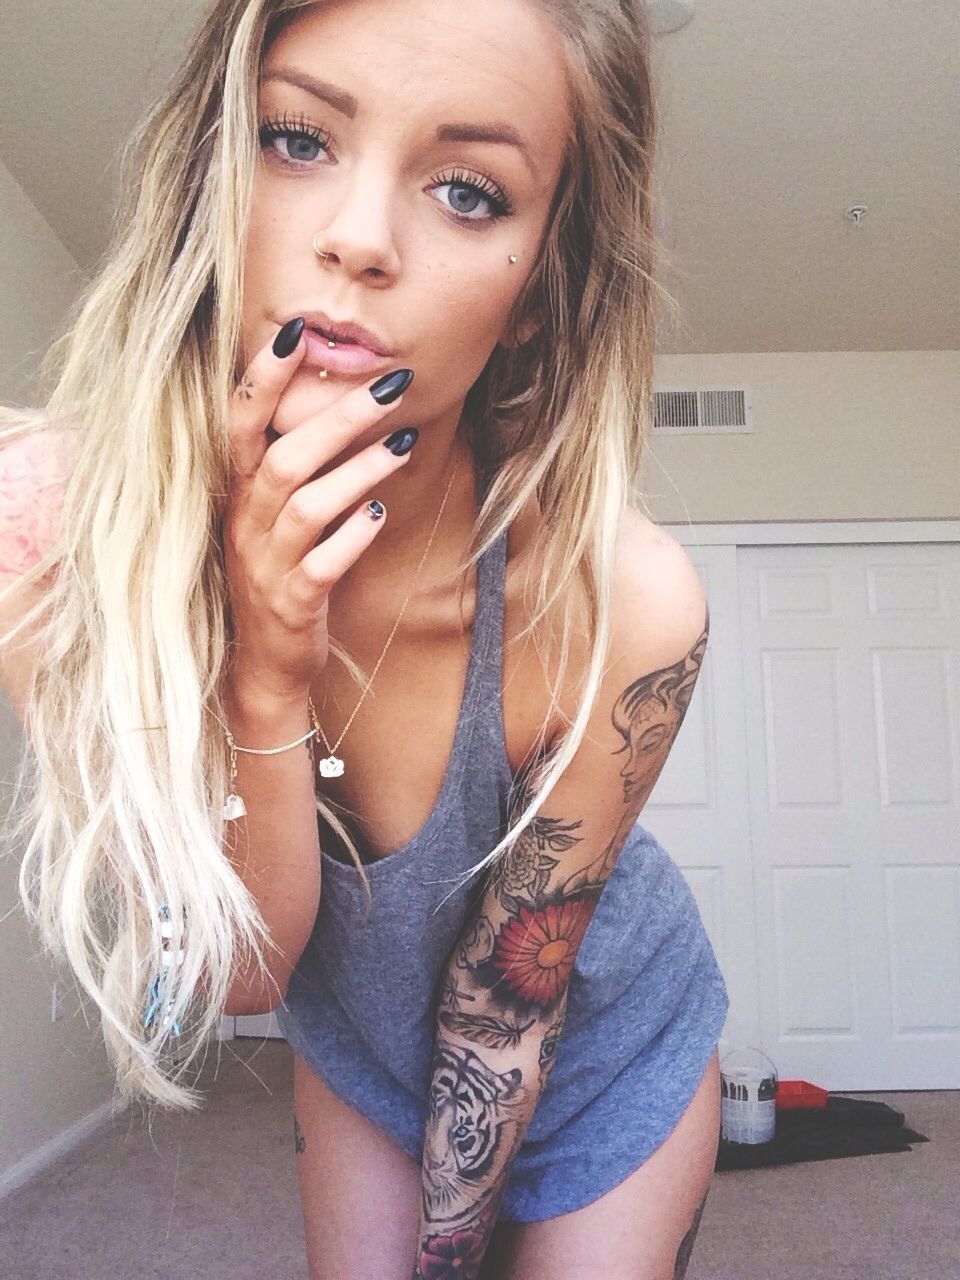 Super hot babe piercing and tattoo